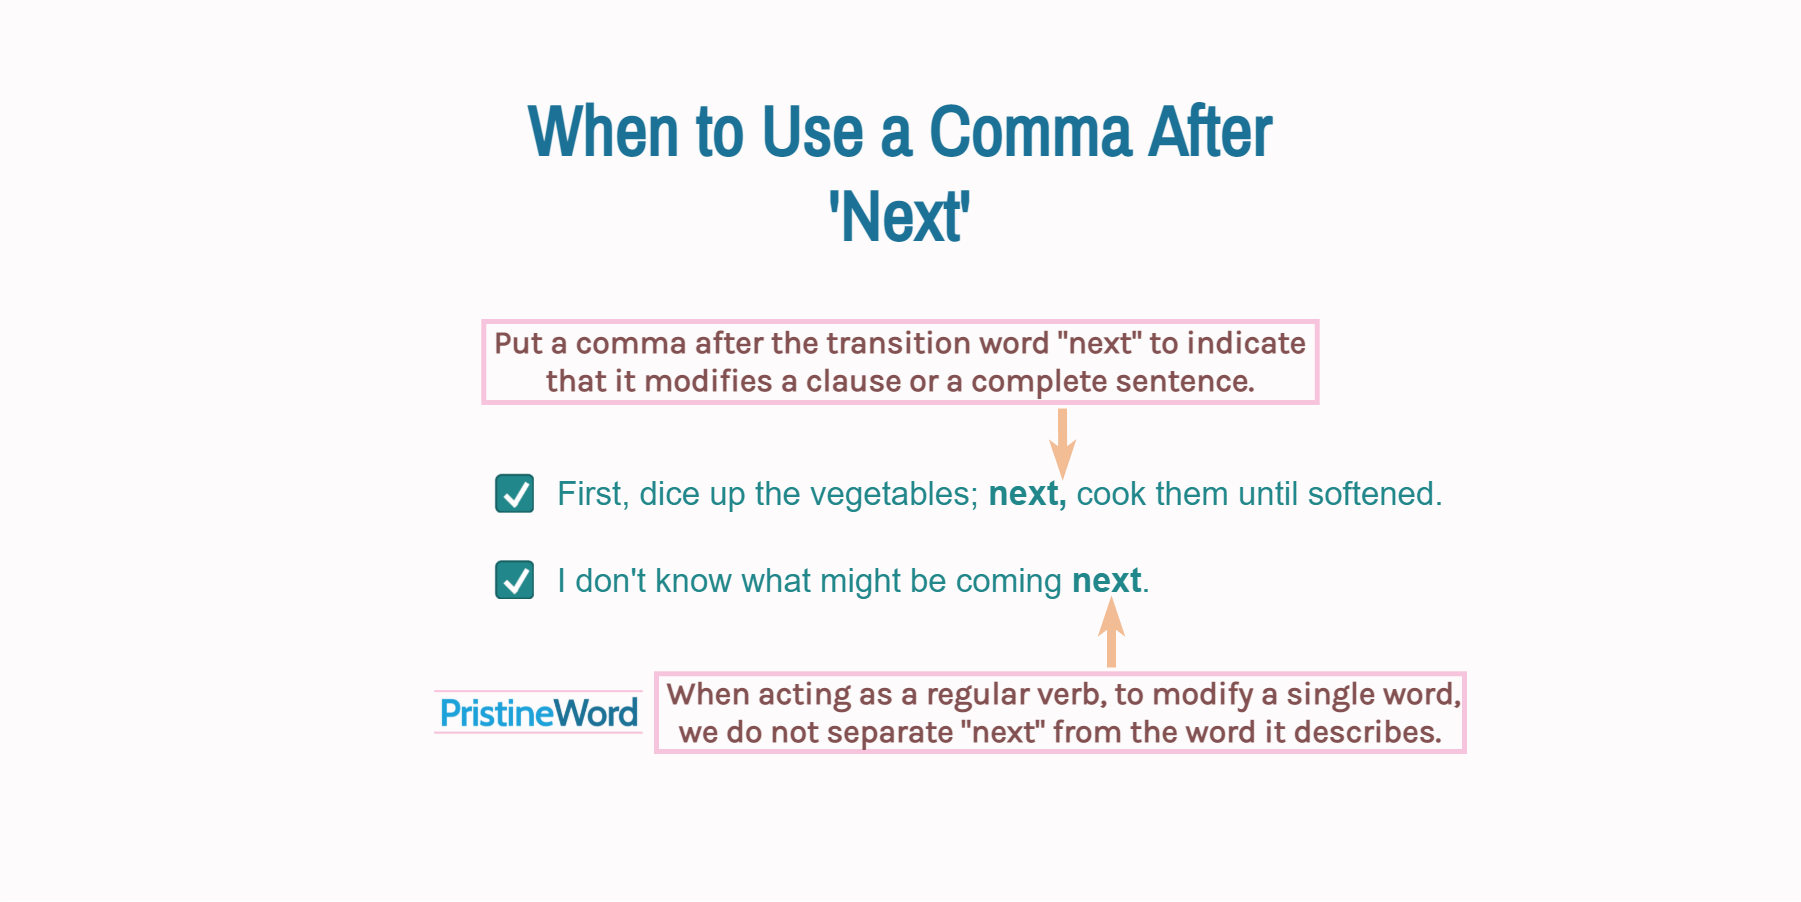 When to Add a Comma After 'Next'